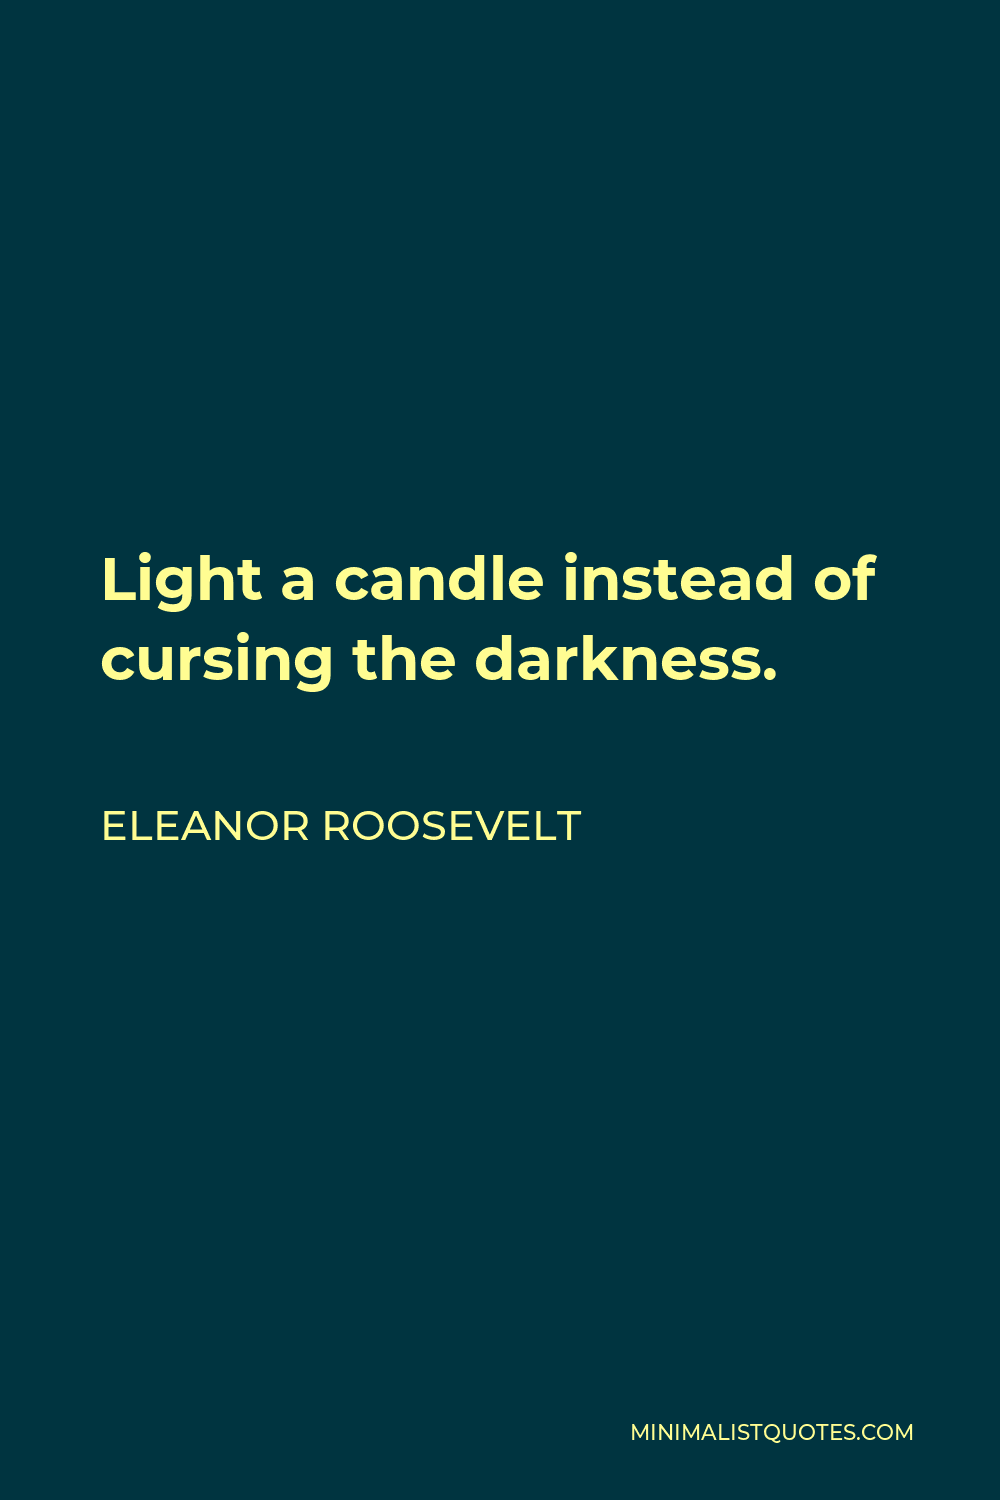 Eleanor Roosevelt Quote - Light a candle instead of cursing the darkness.